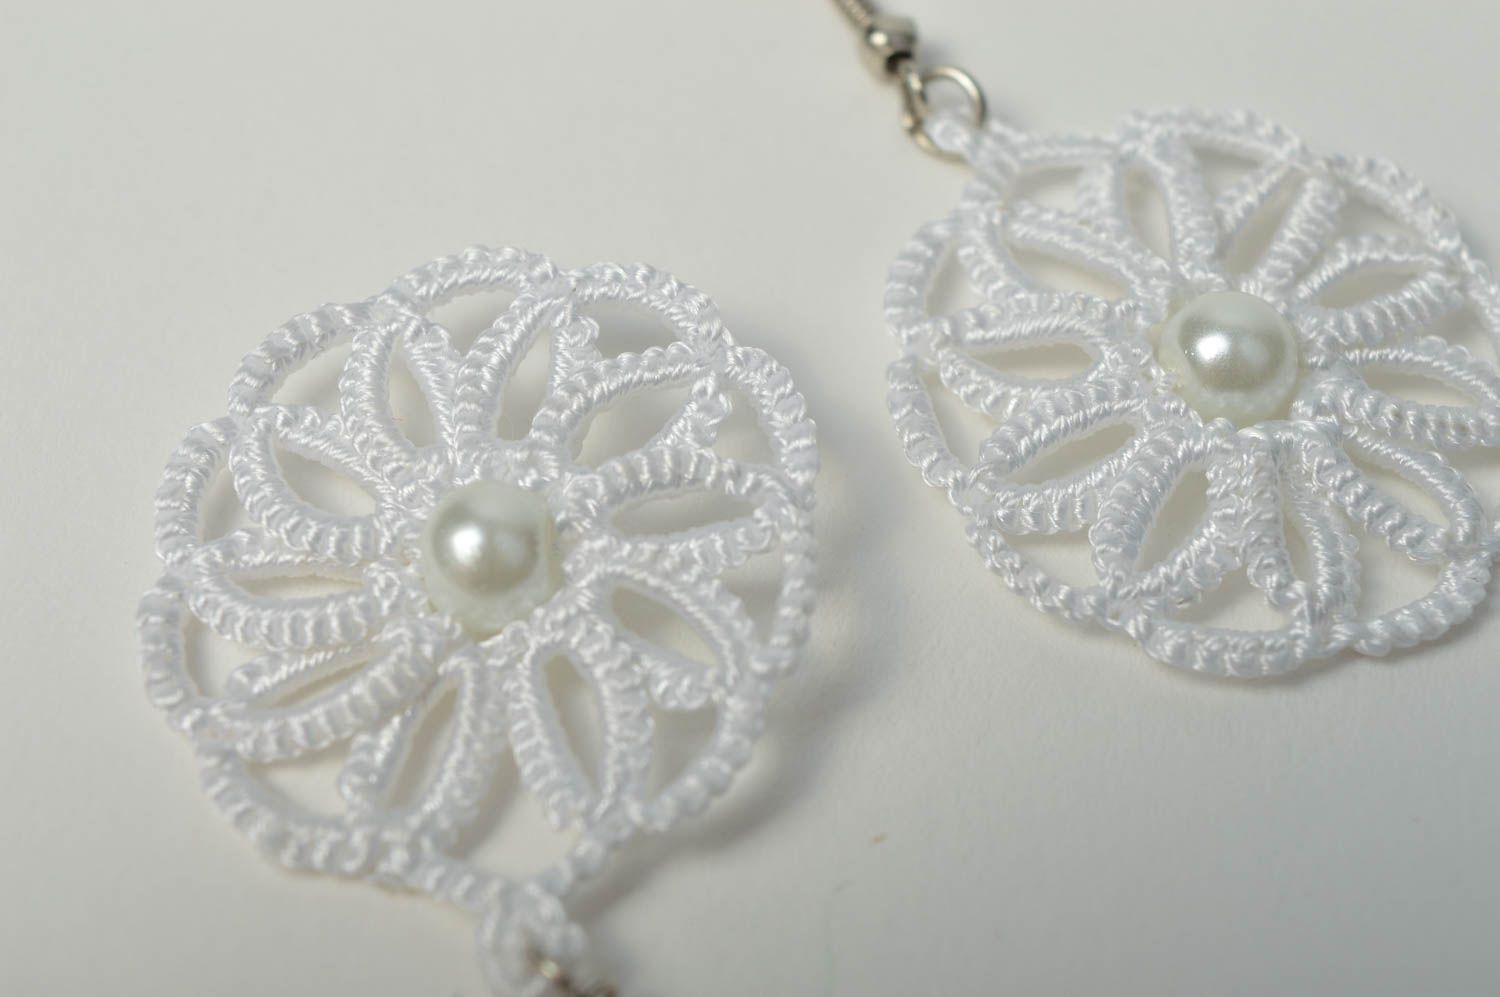 Unusual handmade woven lace earrings textile jewelry designs accessories for her photo 4